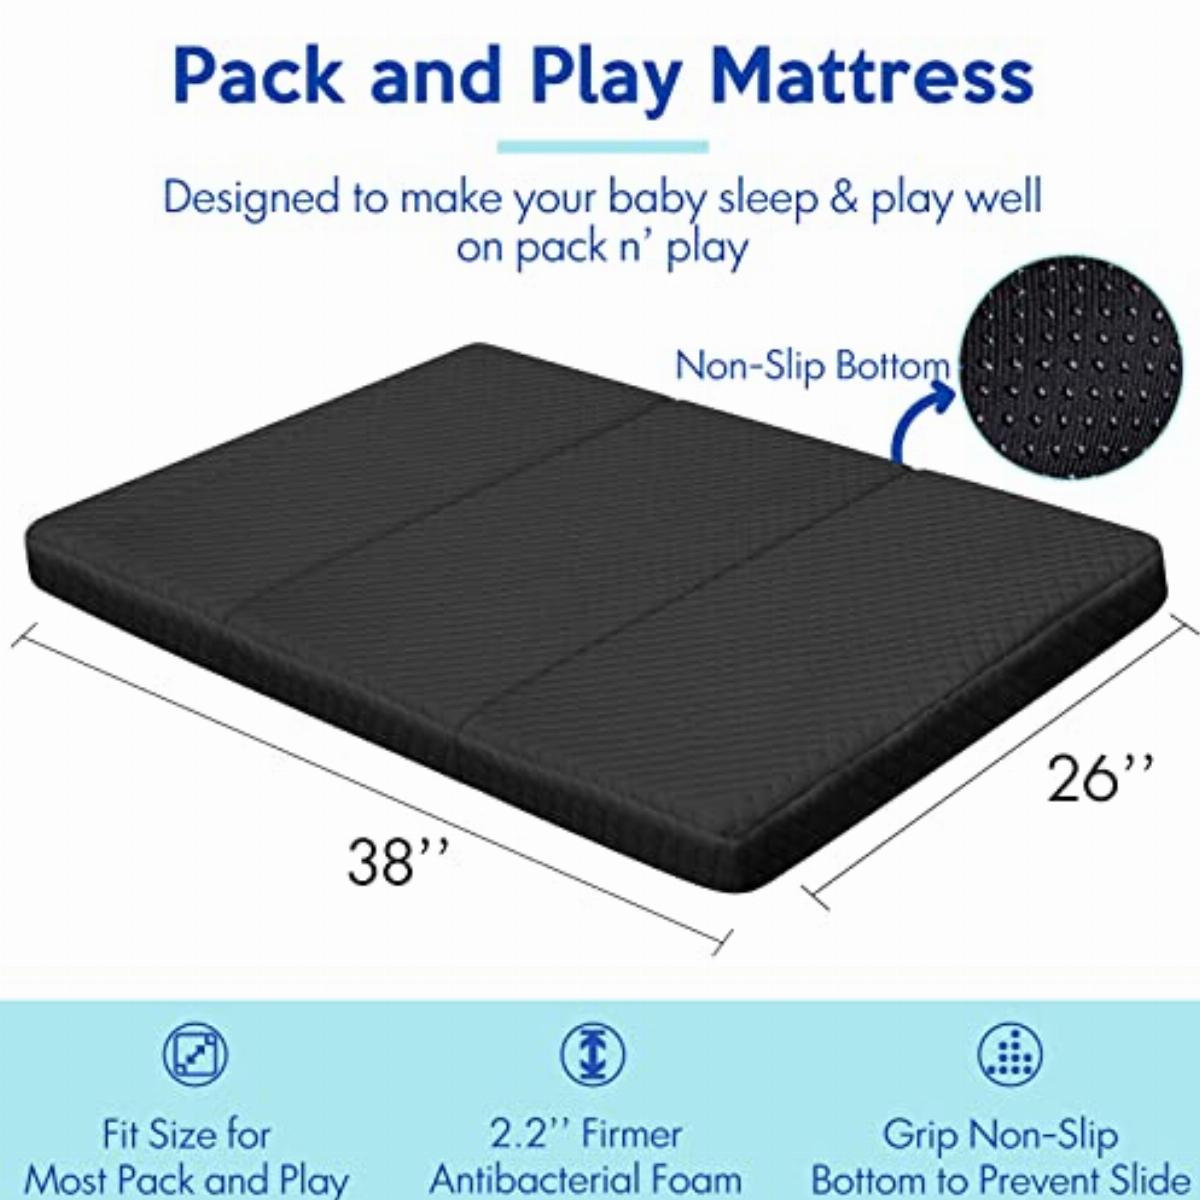 What Is A Pack N Play Mattress?